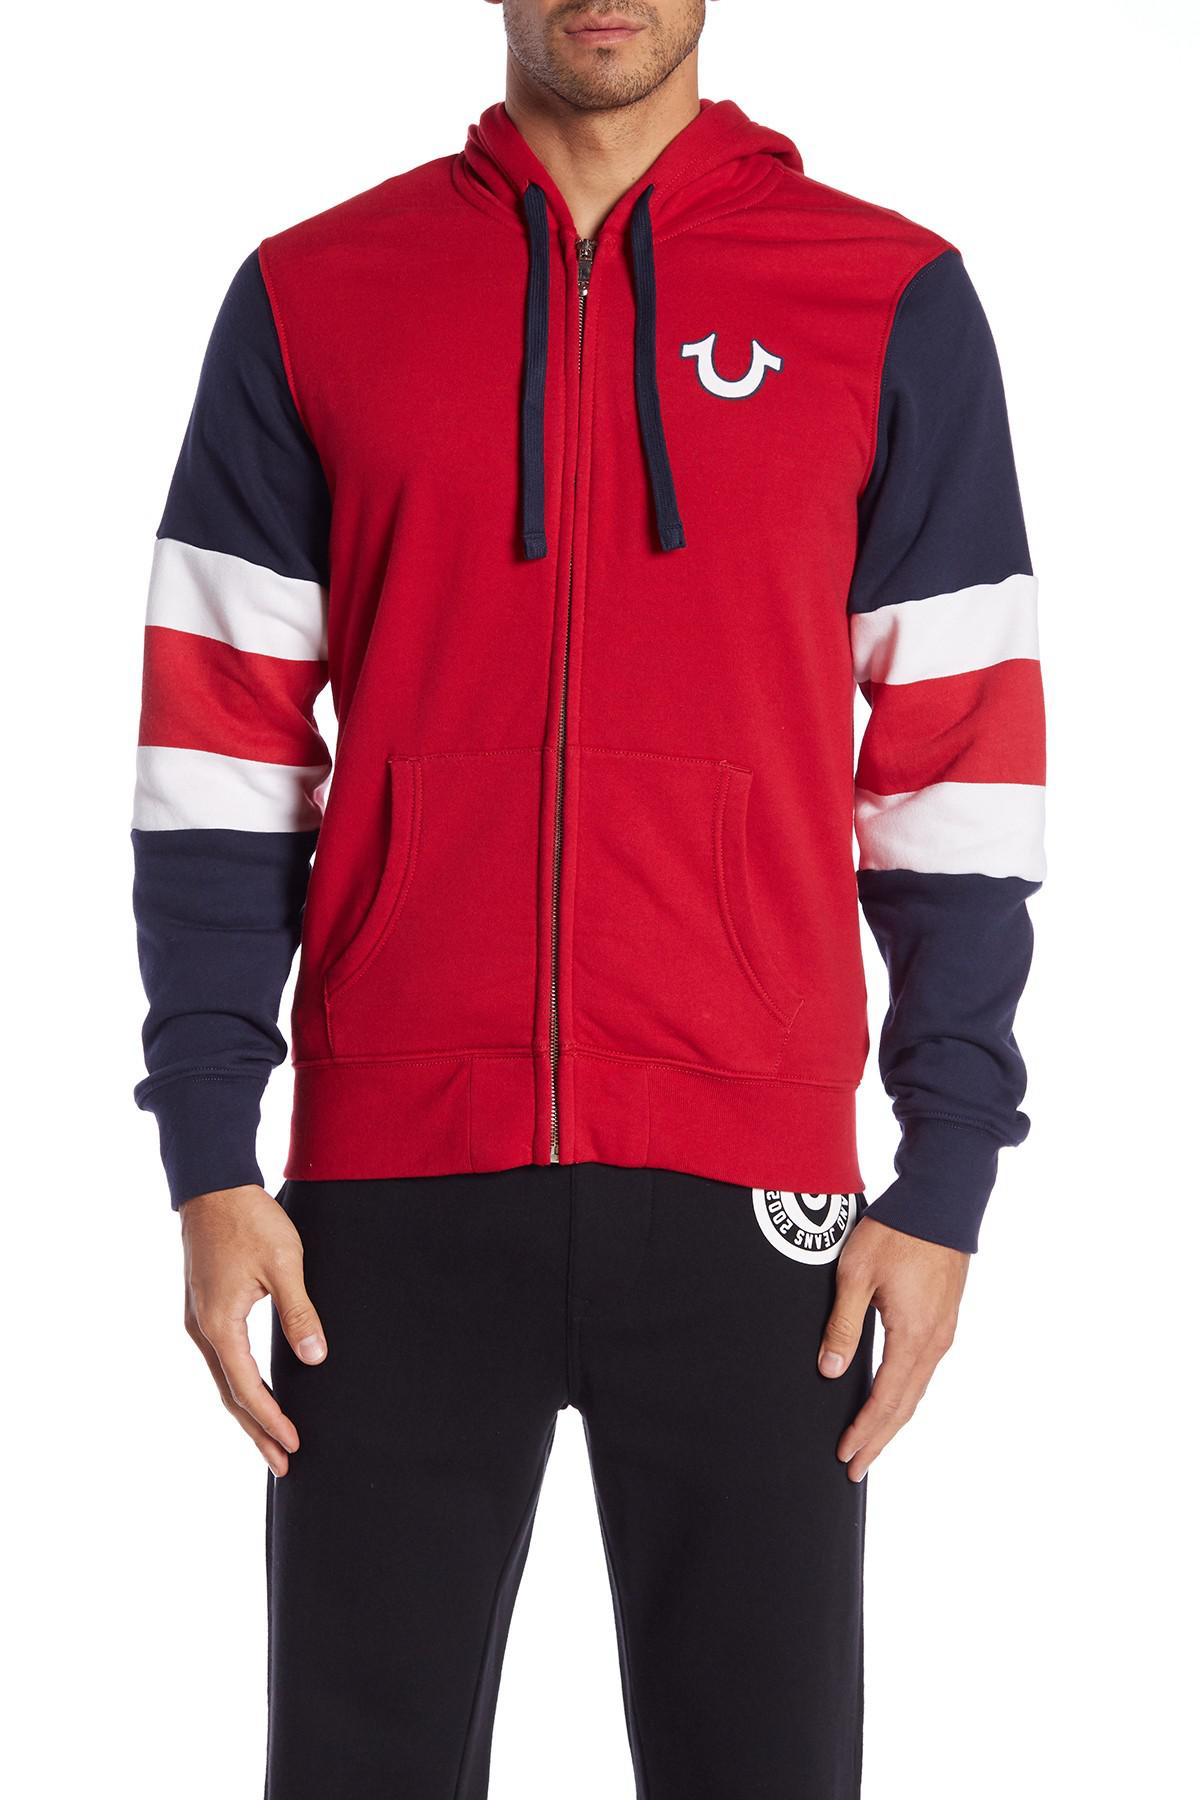 True Religion Cotton Fleece Lined Zip-up Hoodie in Ruby Red/Black (Red ...